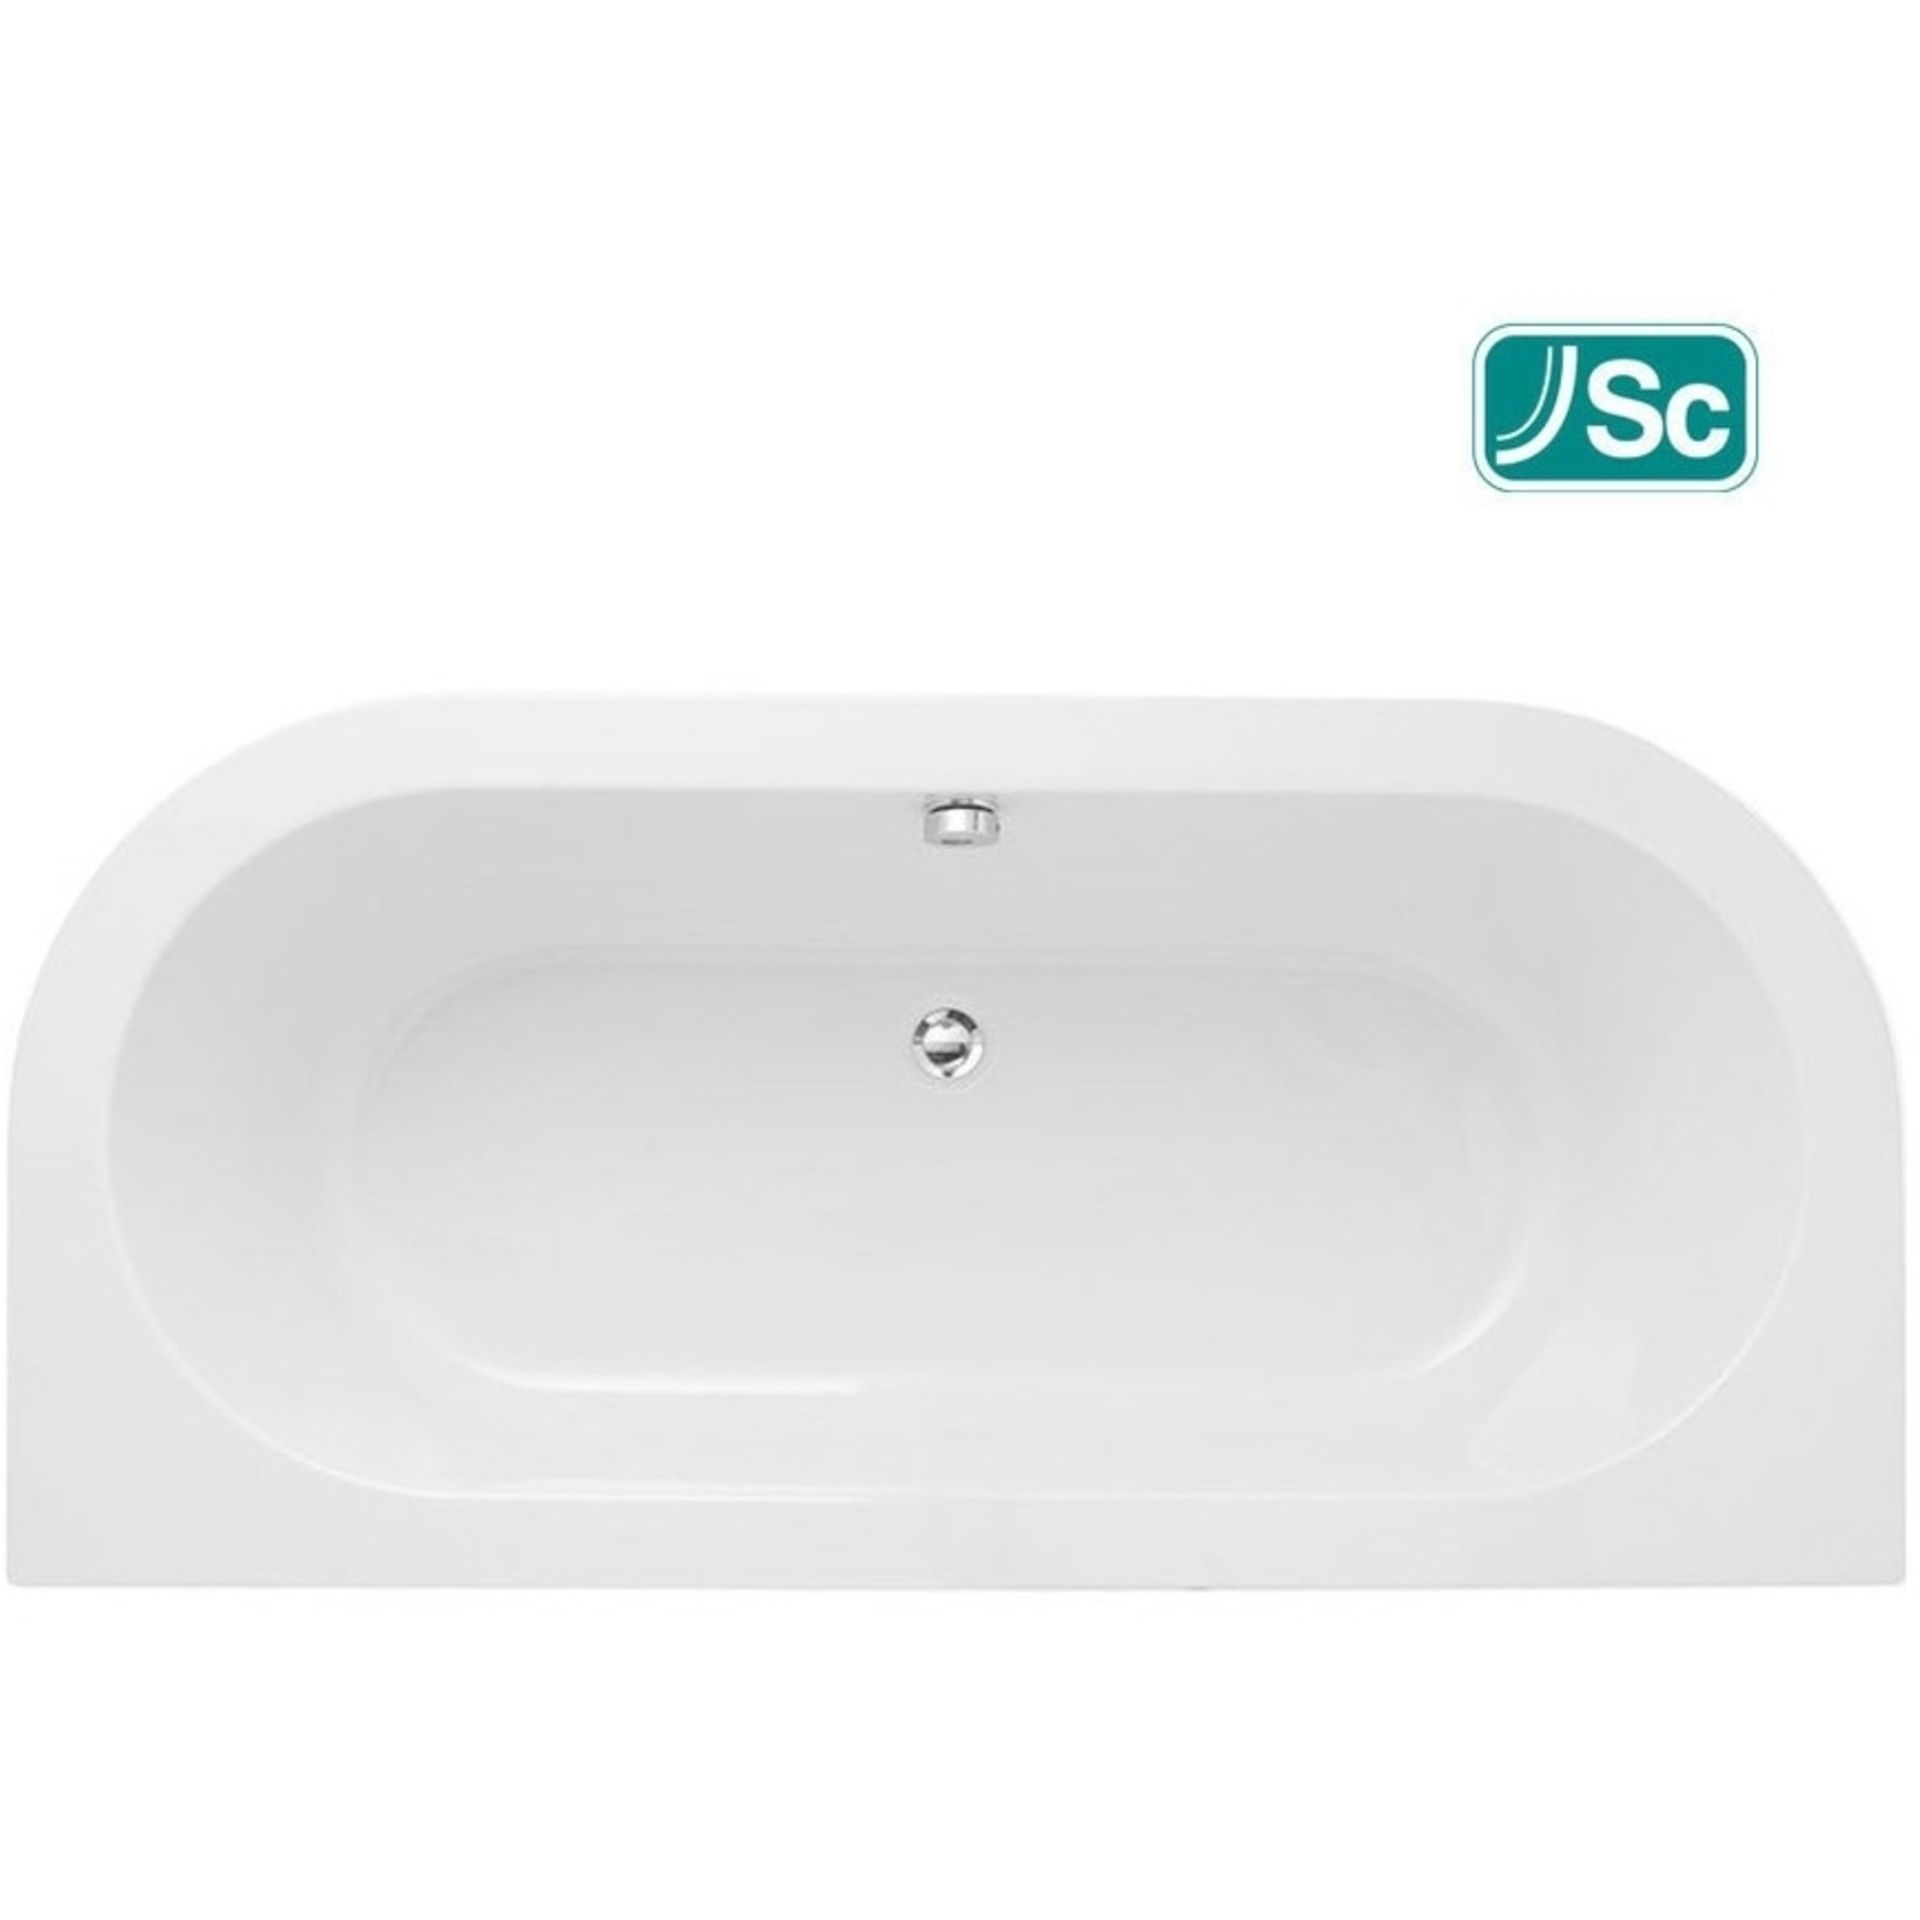 (SUPRM184) New Decadence Supercast Back To Wall 1700x800mm Bath. Double Ended, Modern Back To Wall - Image 2 of 3